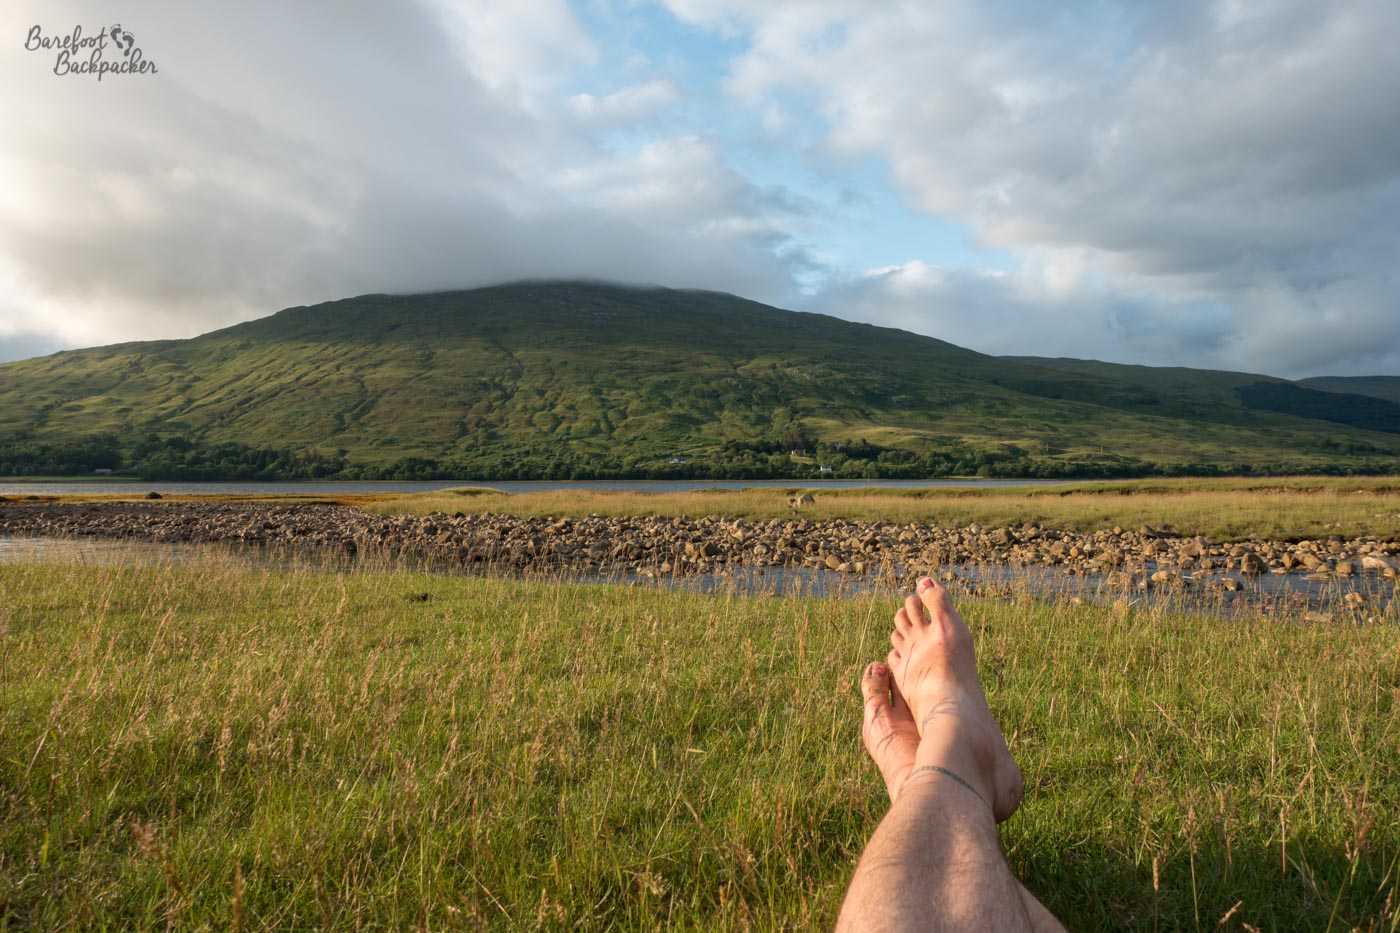 Low-lying grasses, a stream with a  rocky pebbly bank, then more grasses, then a flat loch. The upper half of the image is dominated by a green hill rising beyond the far side of the loch. On the lower right  of the shot are two legs resting flat on the grass, ending in a pair of bare feet, crossed at the ankles. The sun is shining, giving a late evening brightness to proceedings.